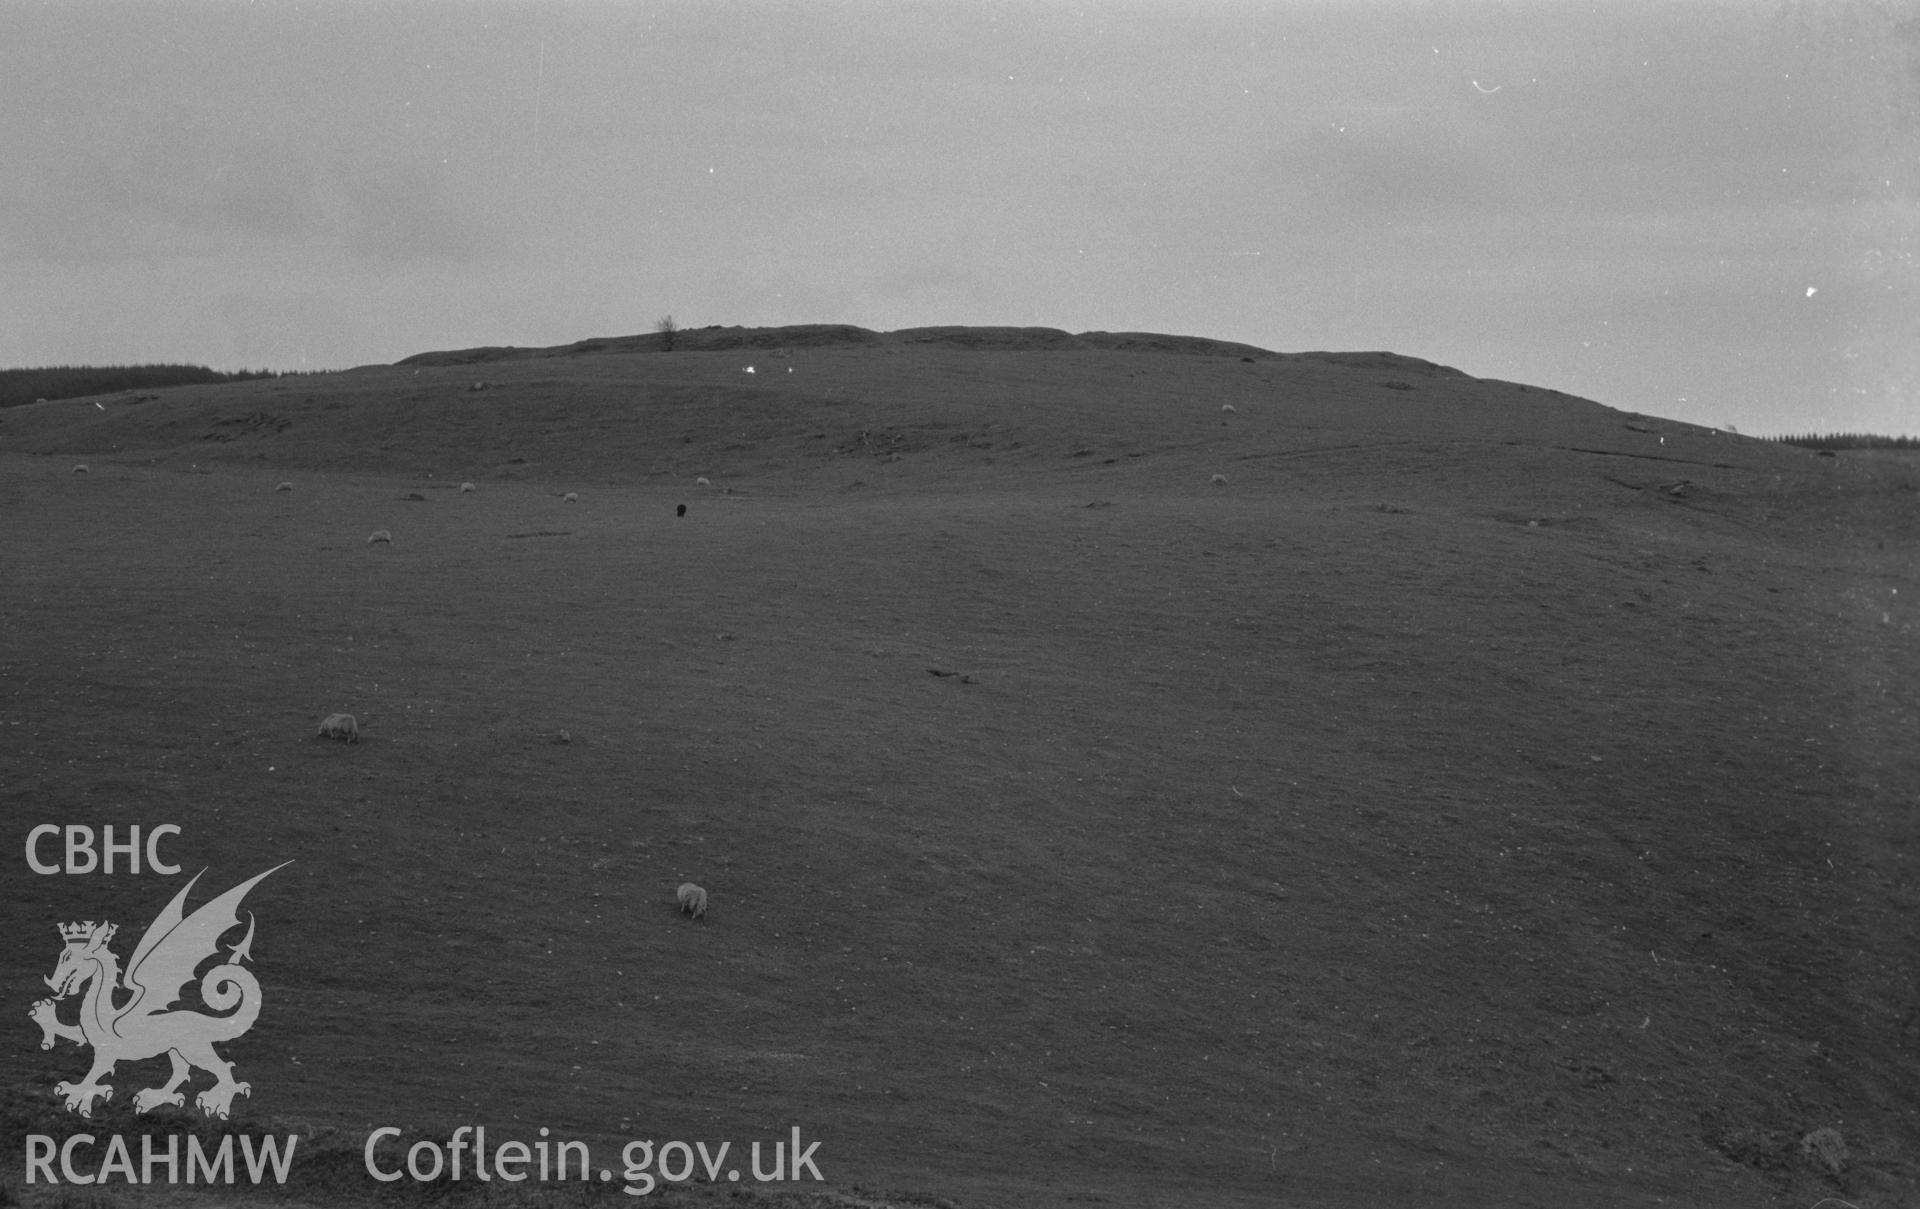 Black and white print of Pen y Castell iron-age camp 1.5km south south east of Elerch at 750ft. Photographed by Arthur Chater in December 1961 from Grid Reference SN 689 850, looking south.